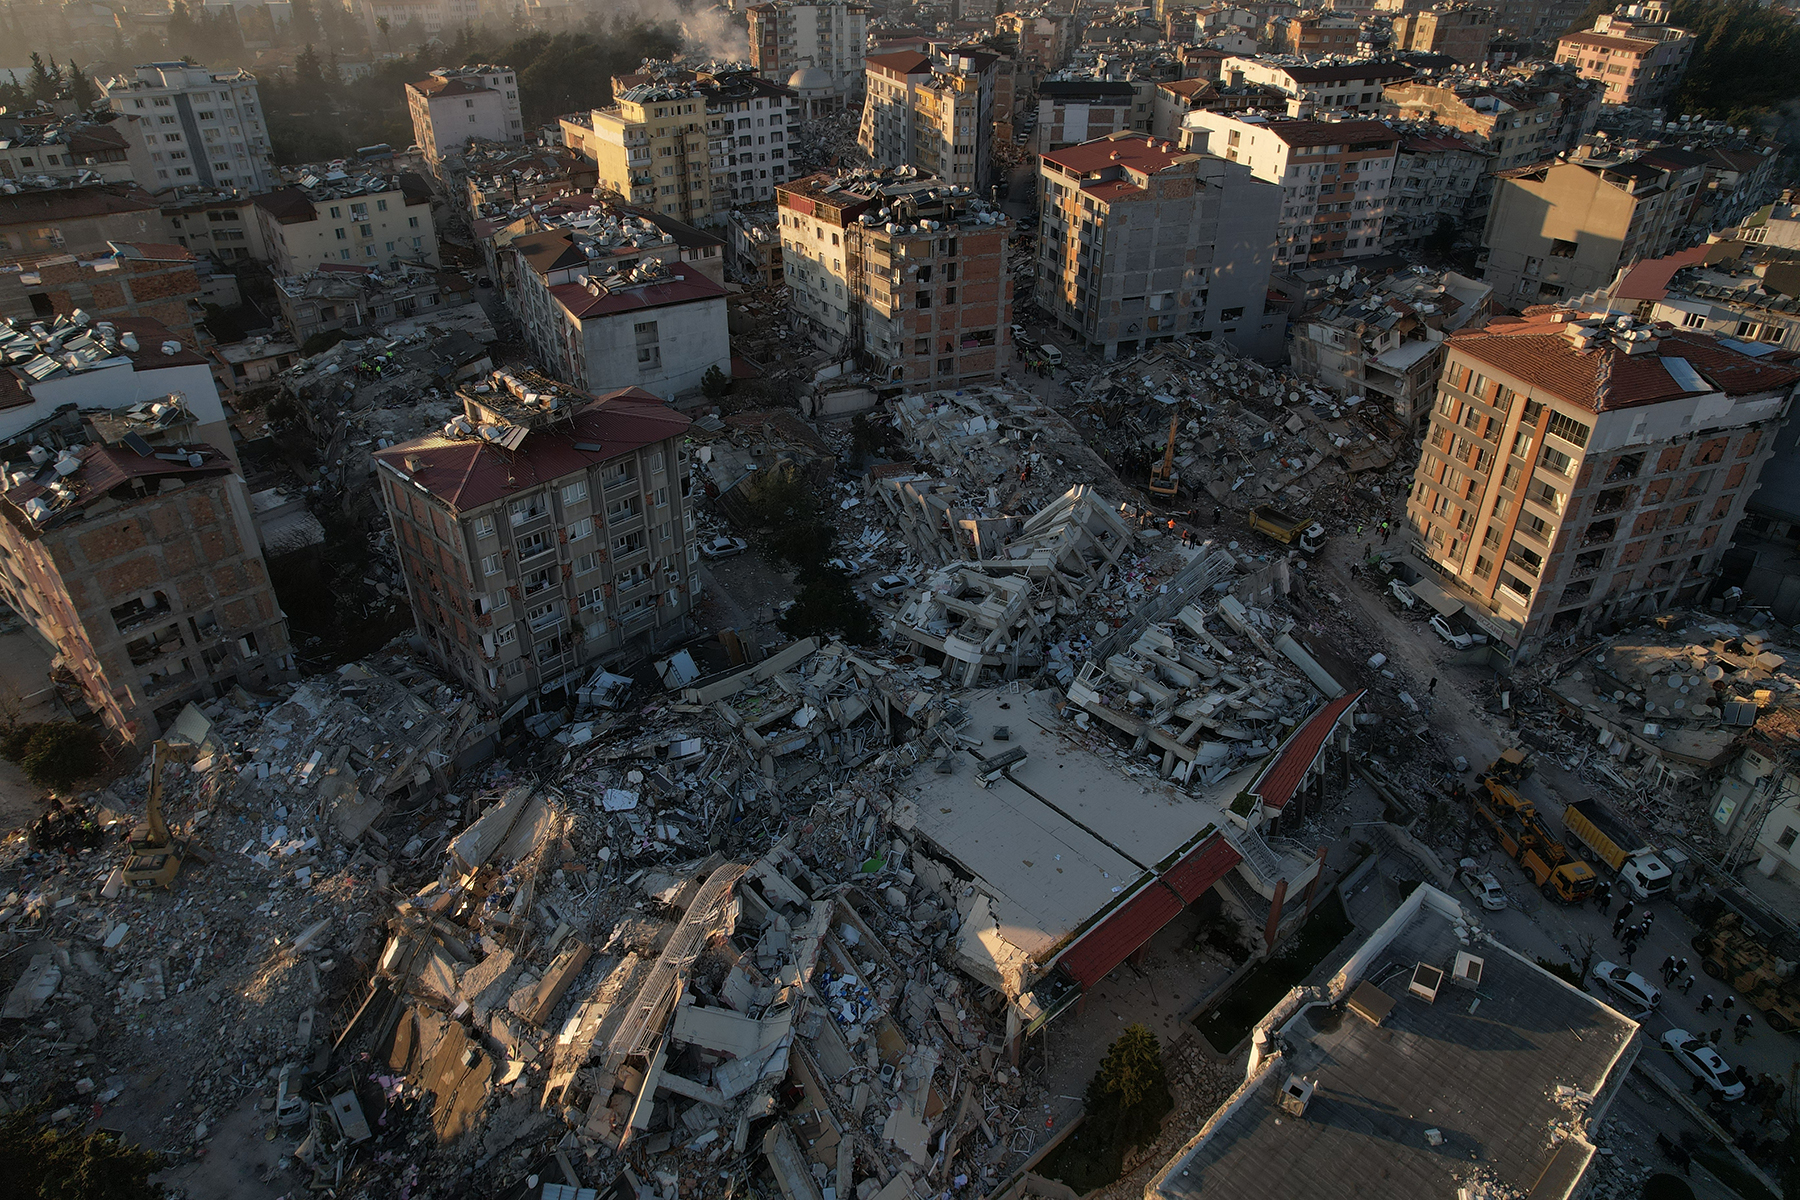 Before new construction can begin, cities like Hatay must clear untold tons of rubble left from collapsed buildings. (Image courtesy Rumman Production/Shutterstock)